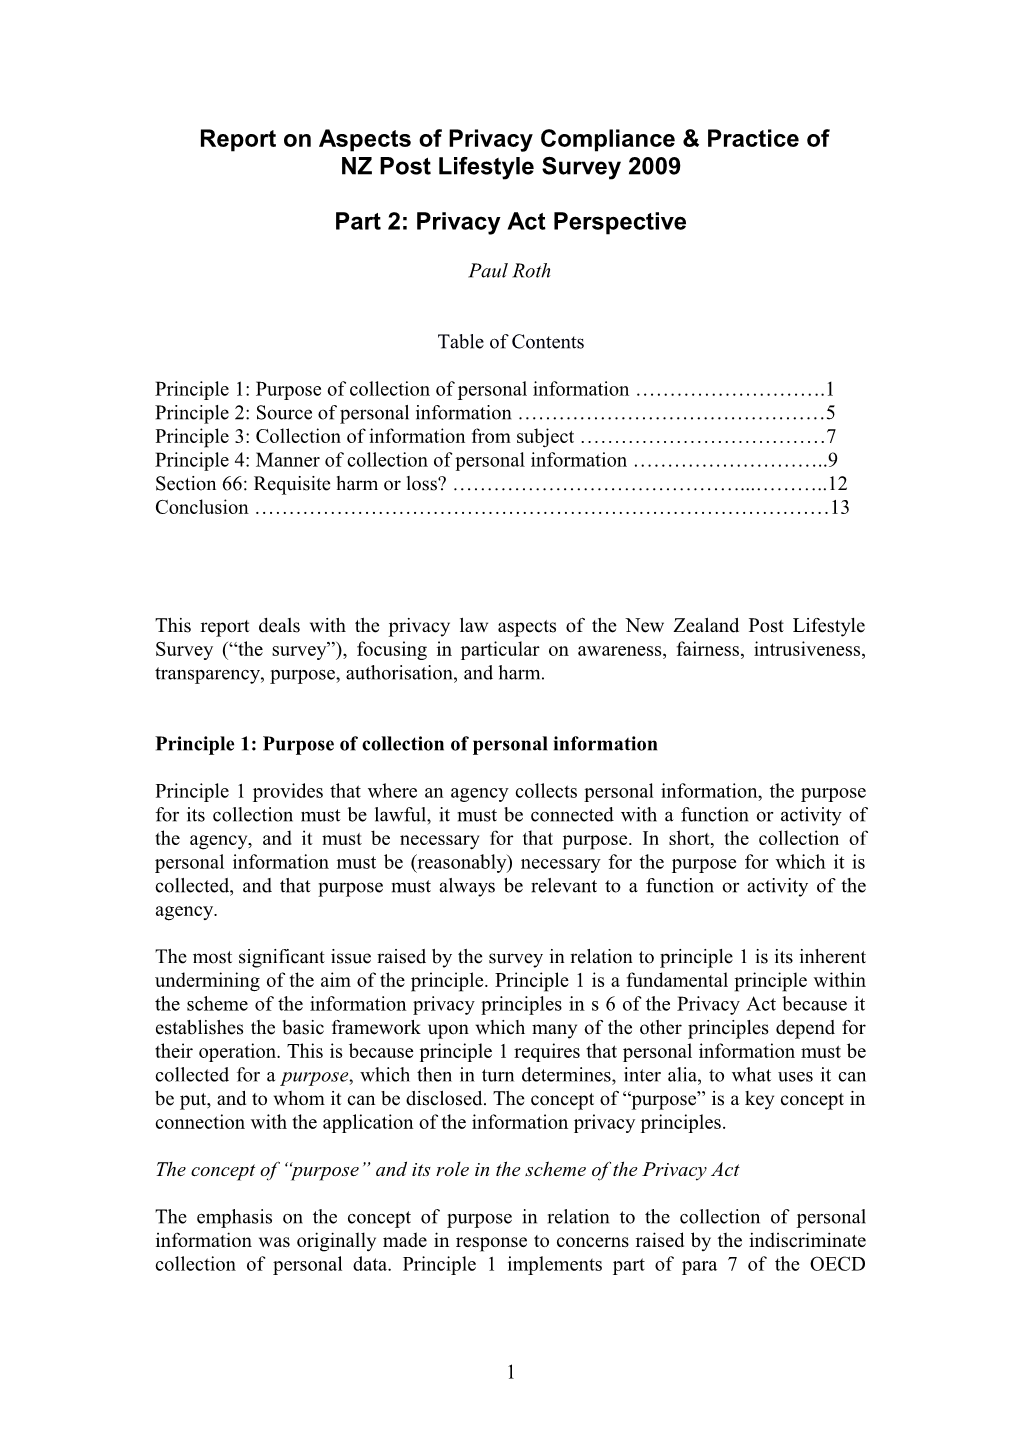 Report on Aspects of Privacy Compliance & Practice Of